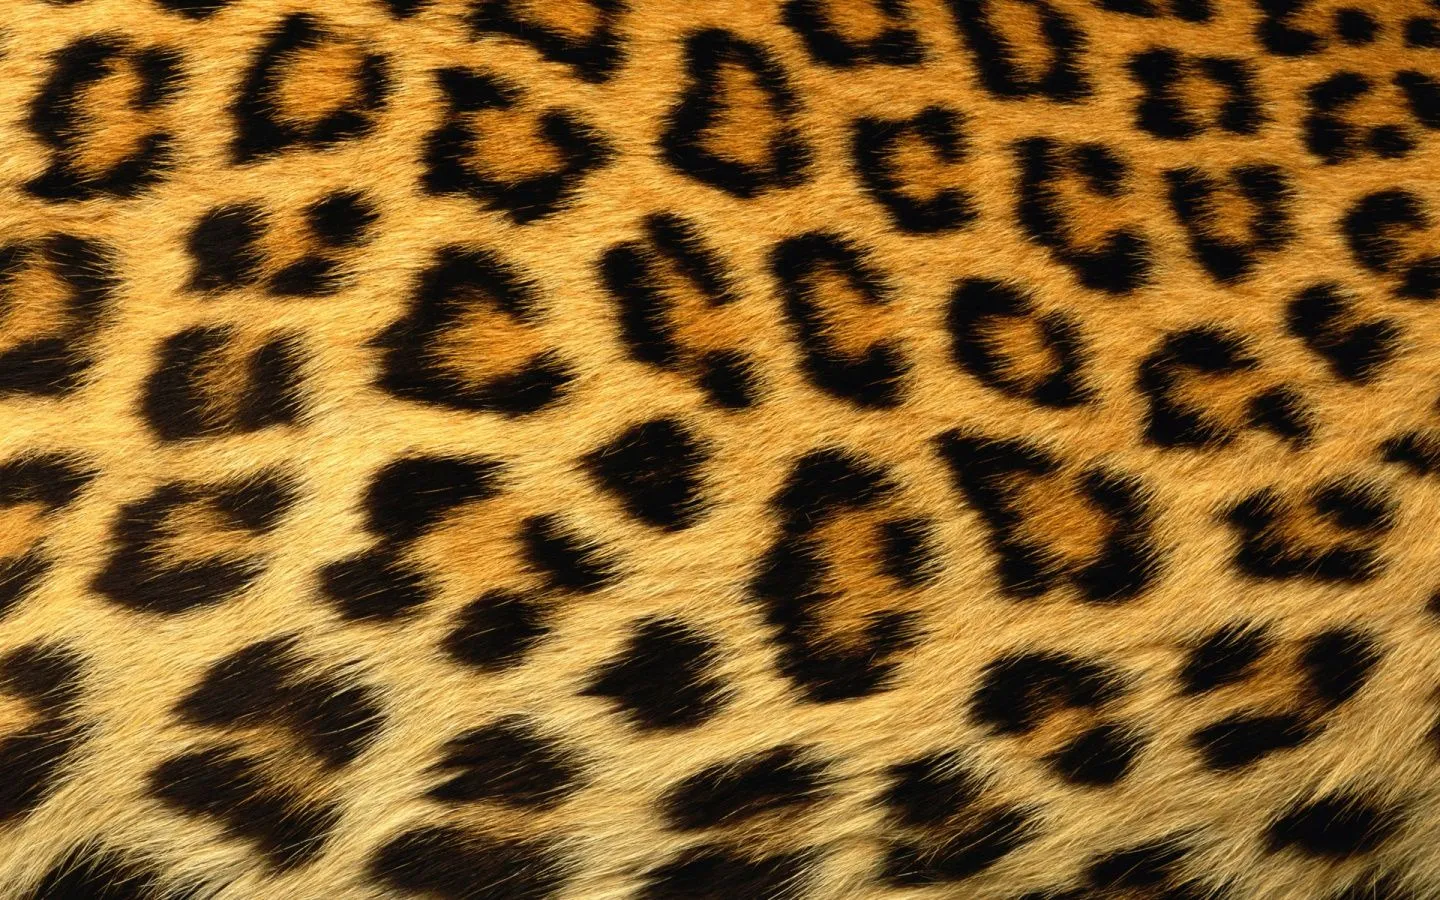 Cheetah vs. Leopard: Can you tell the difference? | Erica B.'s ...